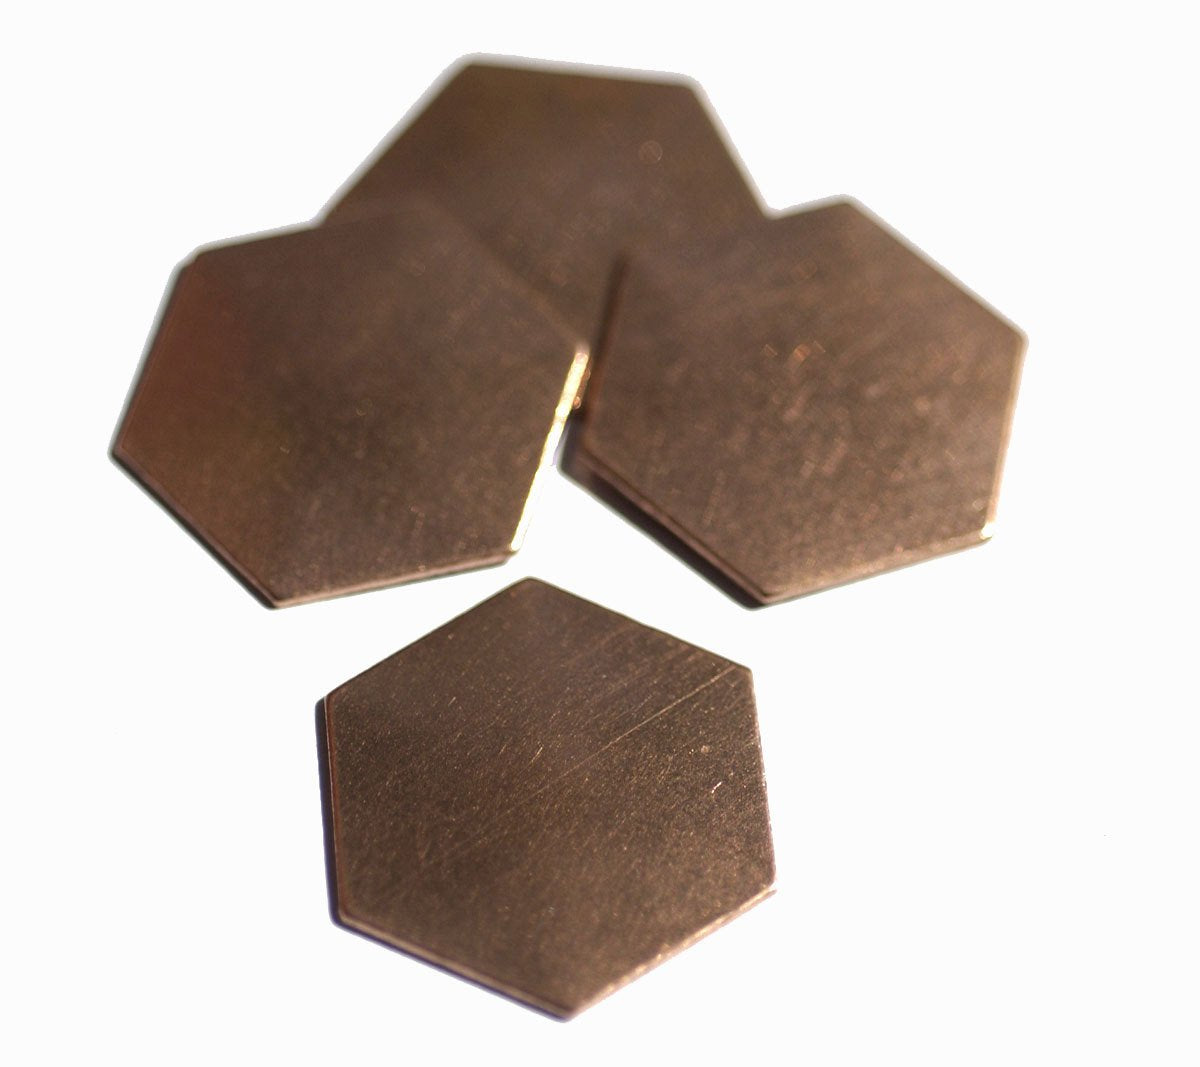 Hexagon 22g 20mm in Lotus Flowers Hexagons Blanks Cutout for Enameling Stamping Texturing Blank Variety of Metals